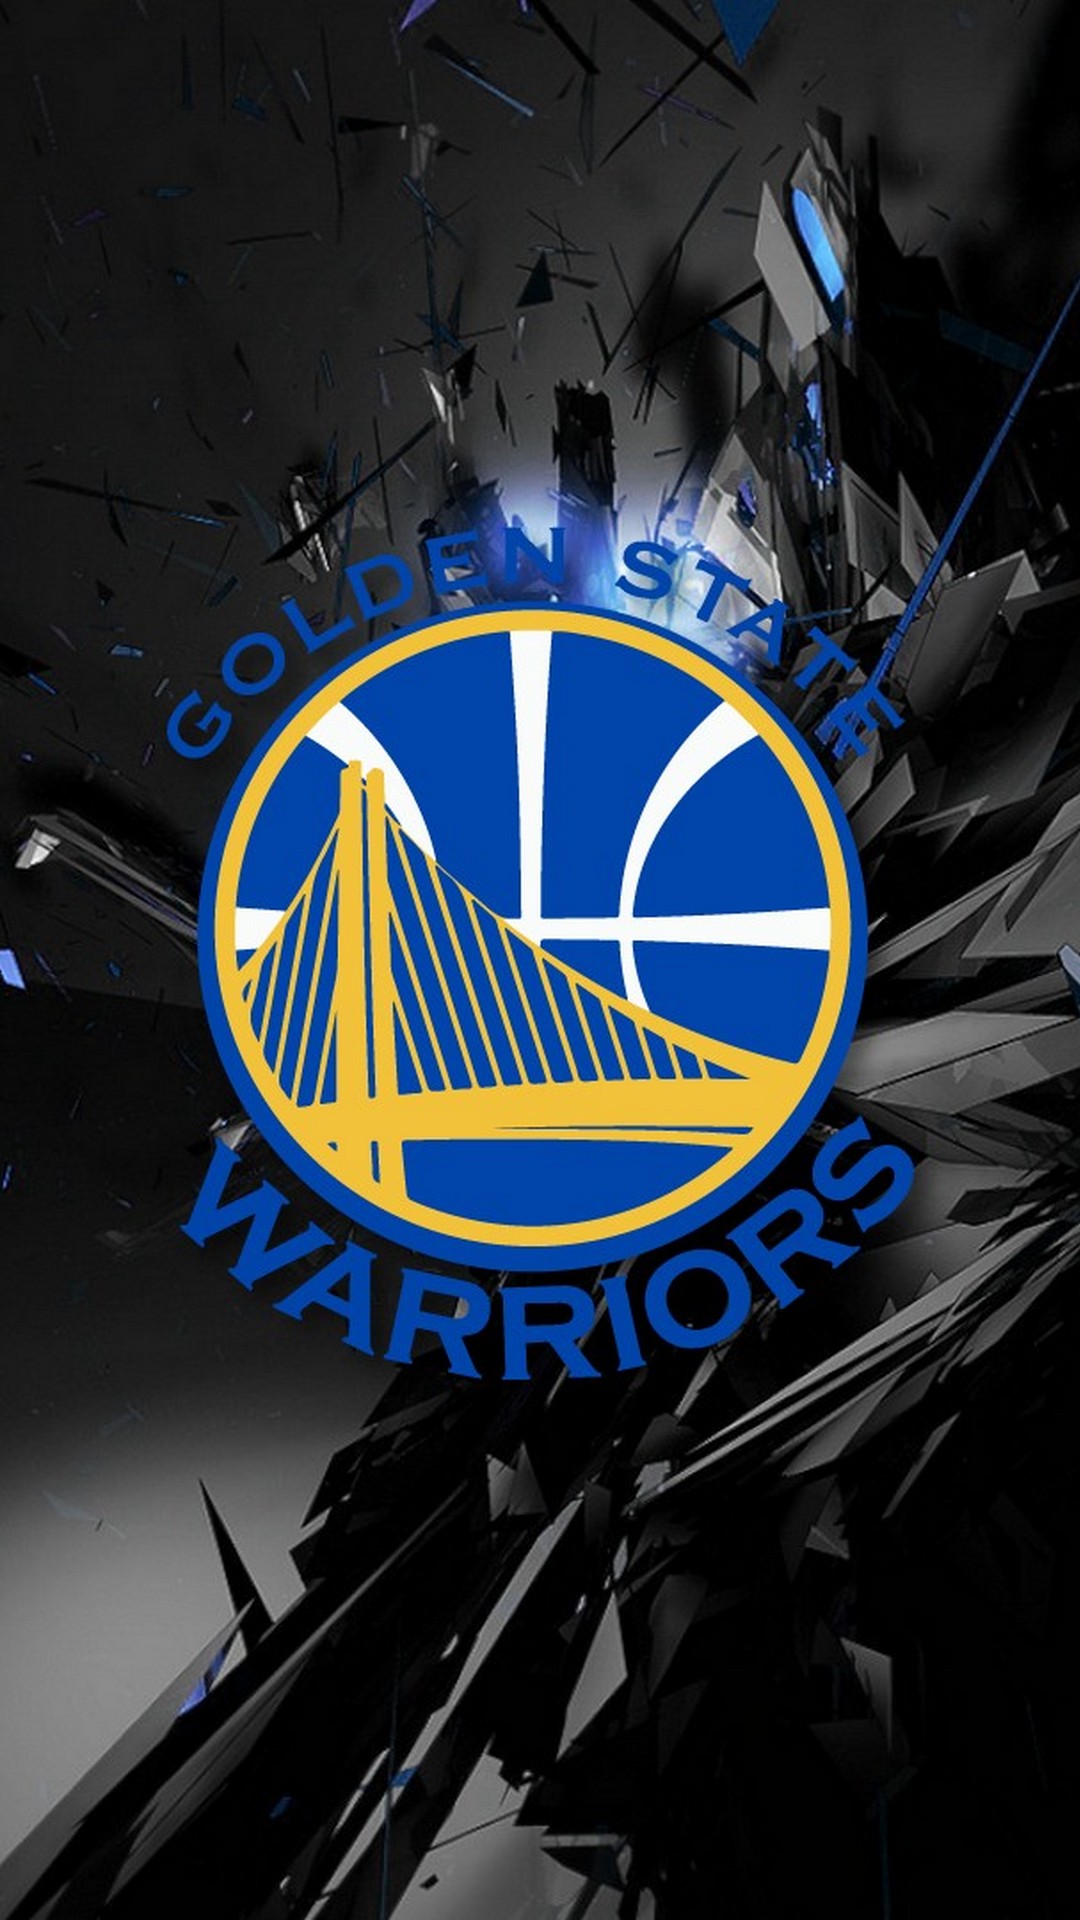 Golden State Warriors Wallpaper iPhone HD with image dimensions 1080x1920 pixel. You can make this wallpaper for your Desktop Computer Backgrounds, Windows or Mac Screensavers, iPhone Lock screen, Tablet or Android and another Mobile Phone device